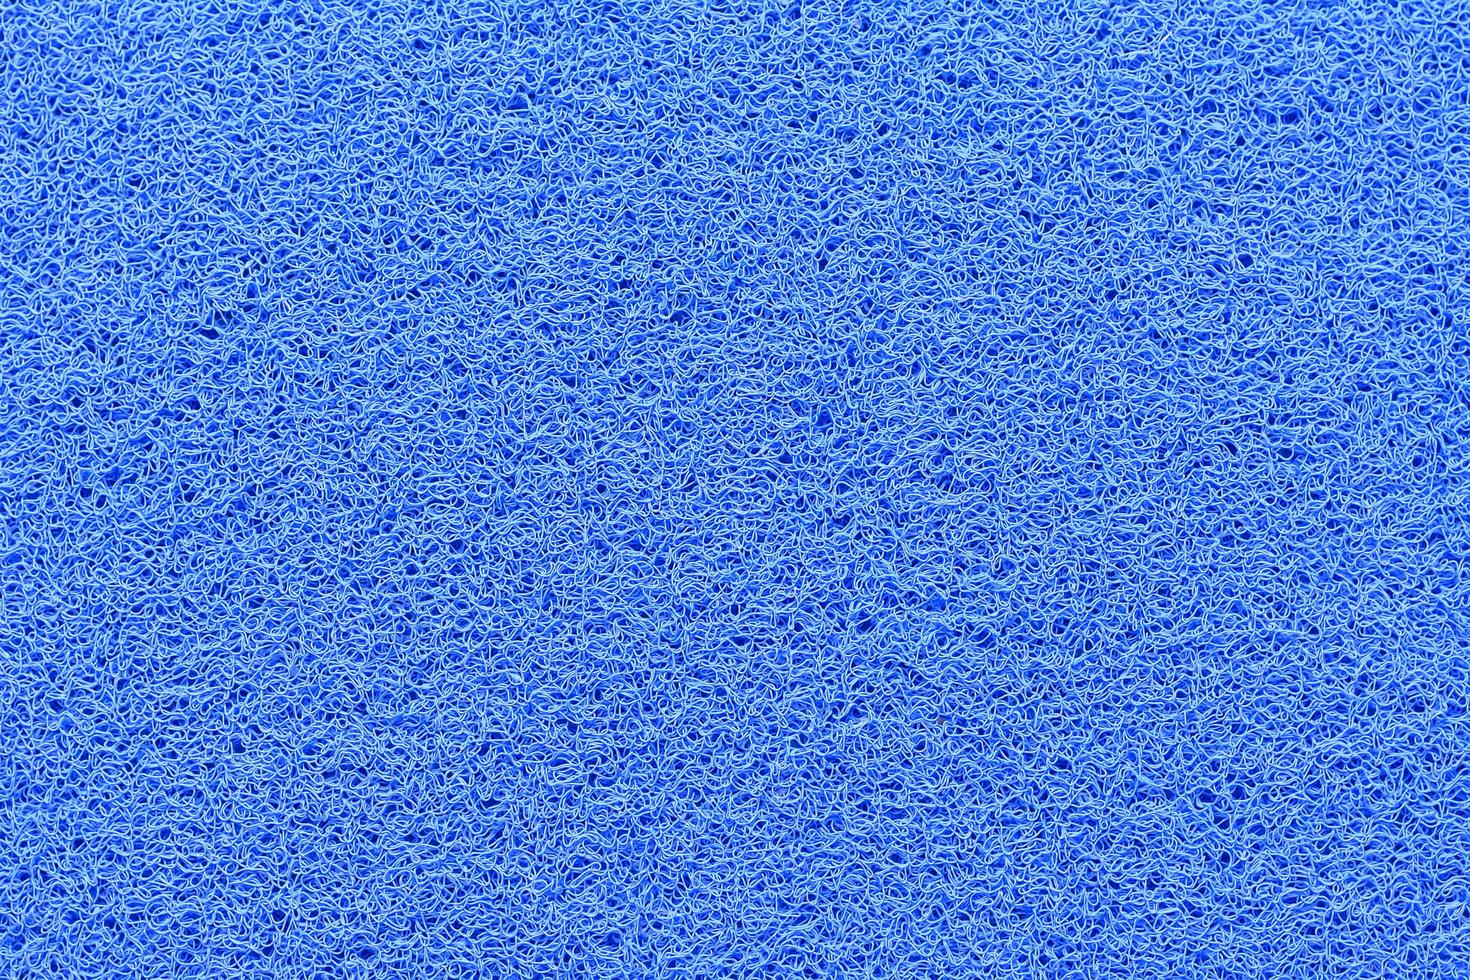 The blue PVC carpet made from plastic. photo